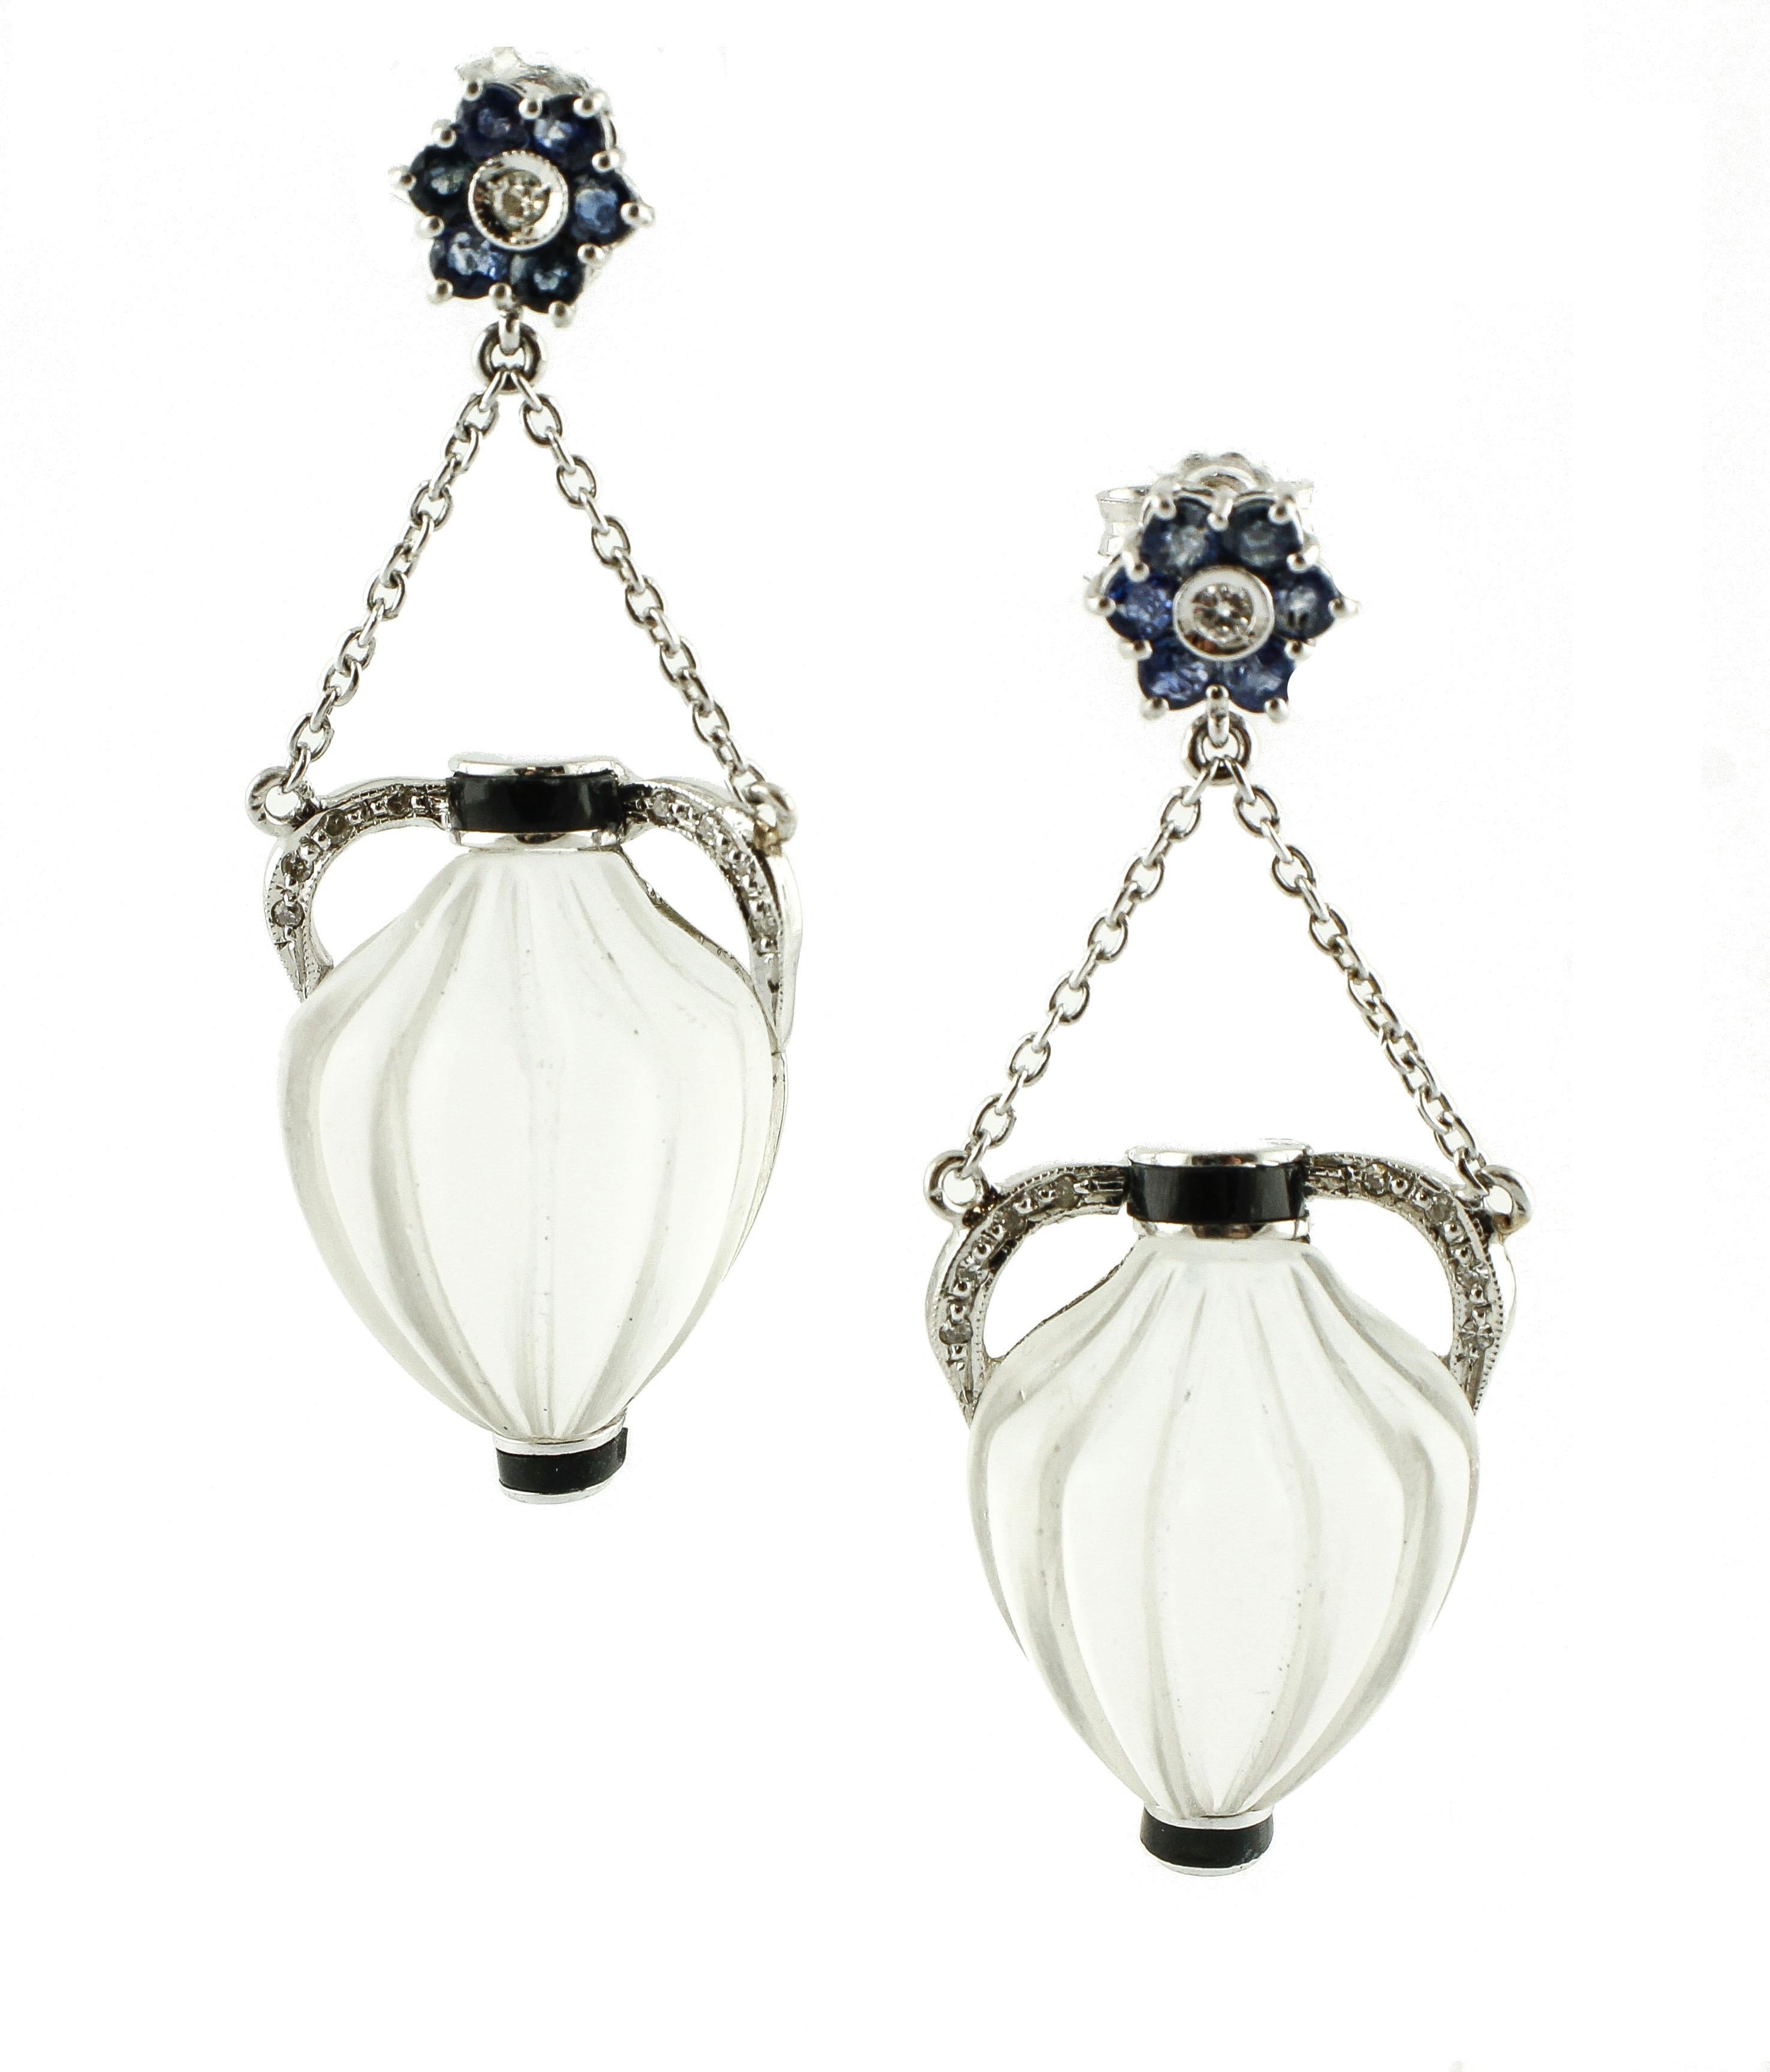 An amphora of crystal rock (6.30 gram / 0.22 f.o.) hang on sapphire (0.84 carat) flowers with diamond spot (0.16 carat). 43 mm / 1.69 inch long.14 Kt white god earrings.
Us Size
Width (anphora) 0.59 inch
Length (earring) 1.69 inch
If you like, you